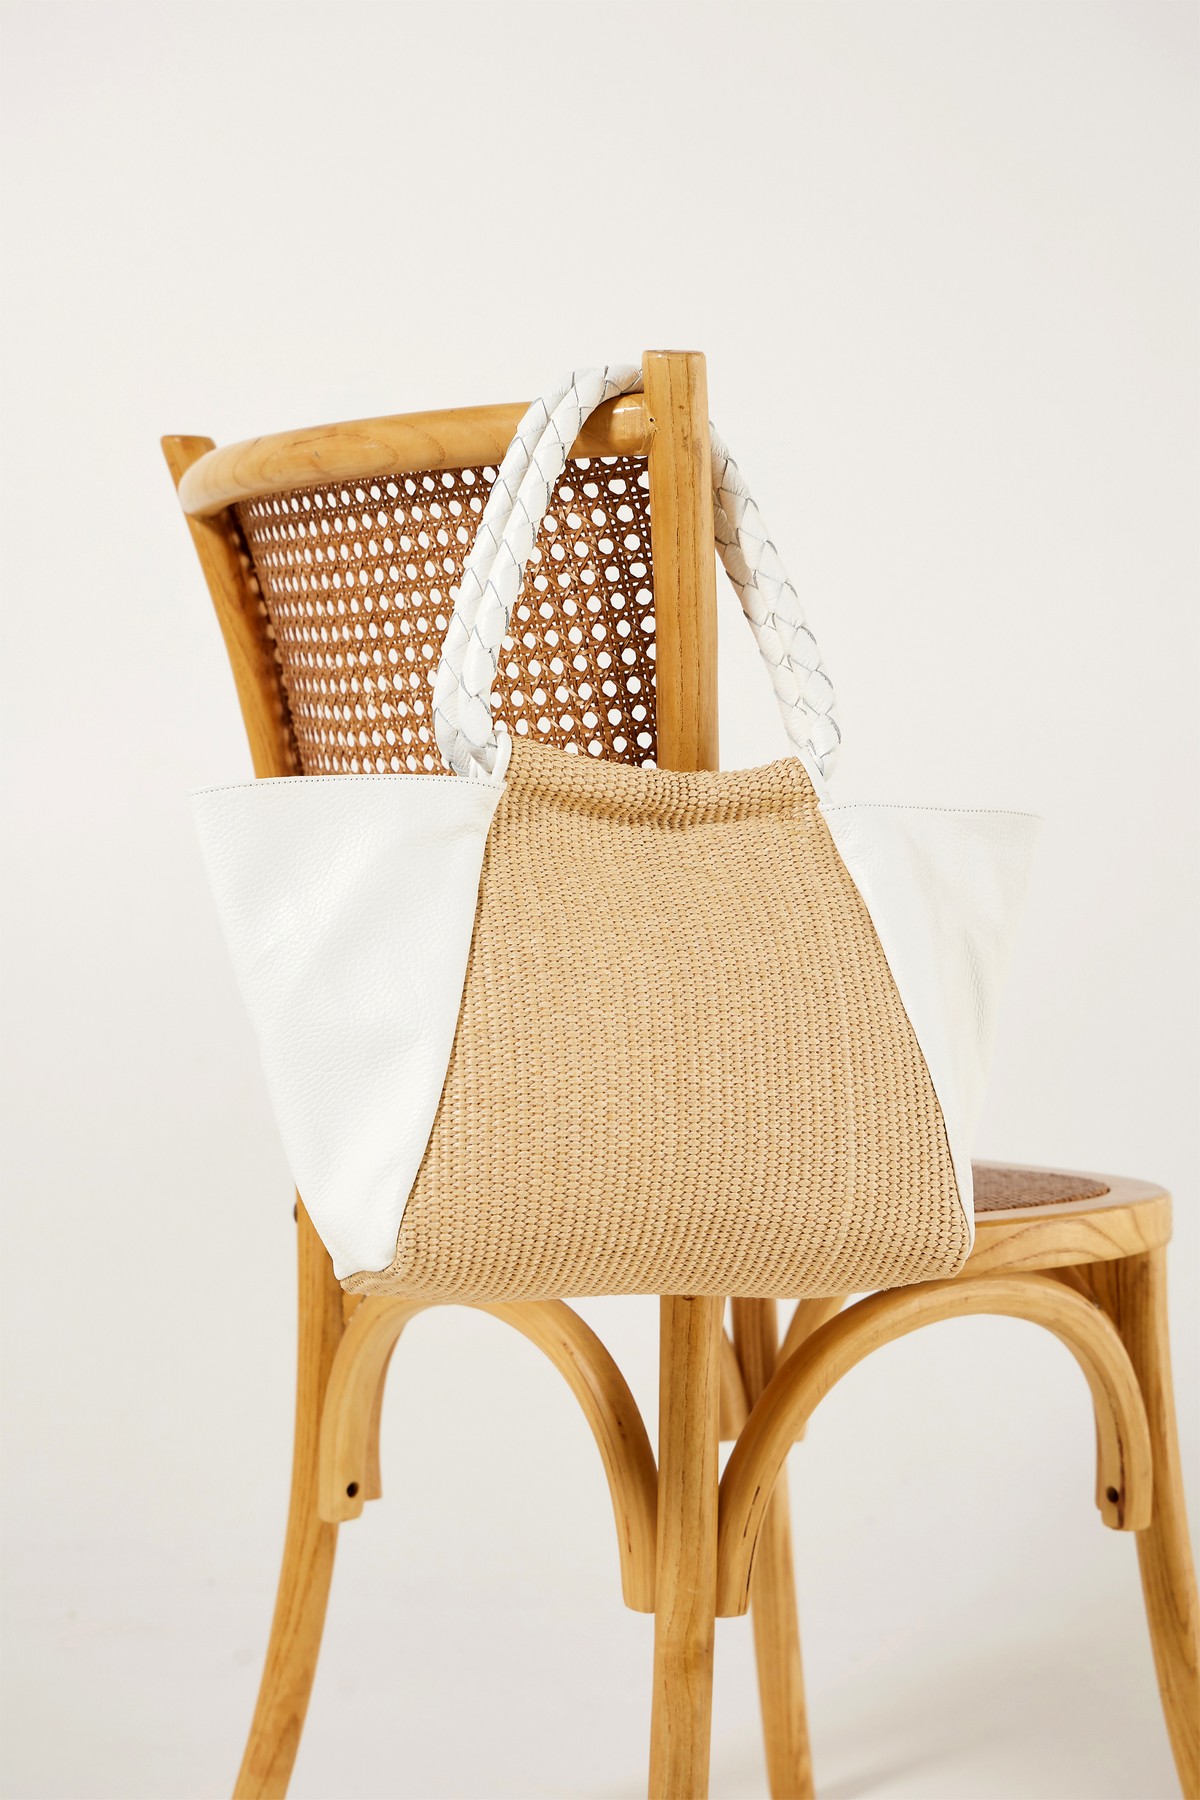 Summer straw bag with white leather